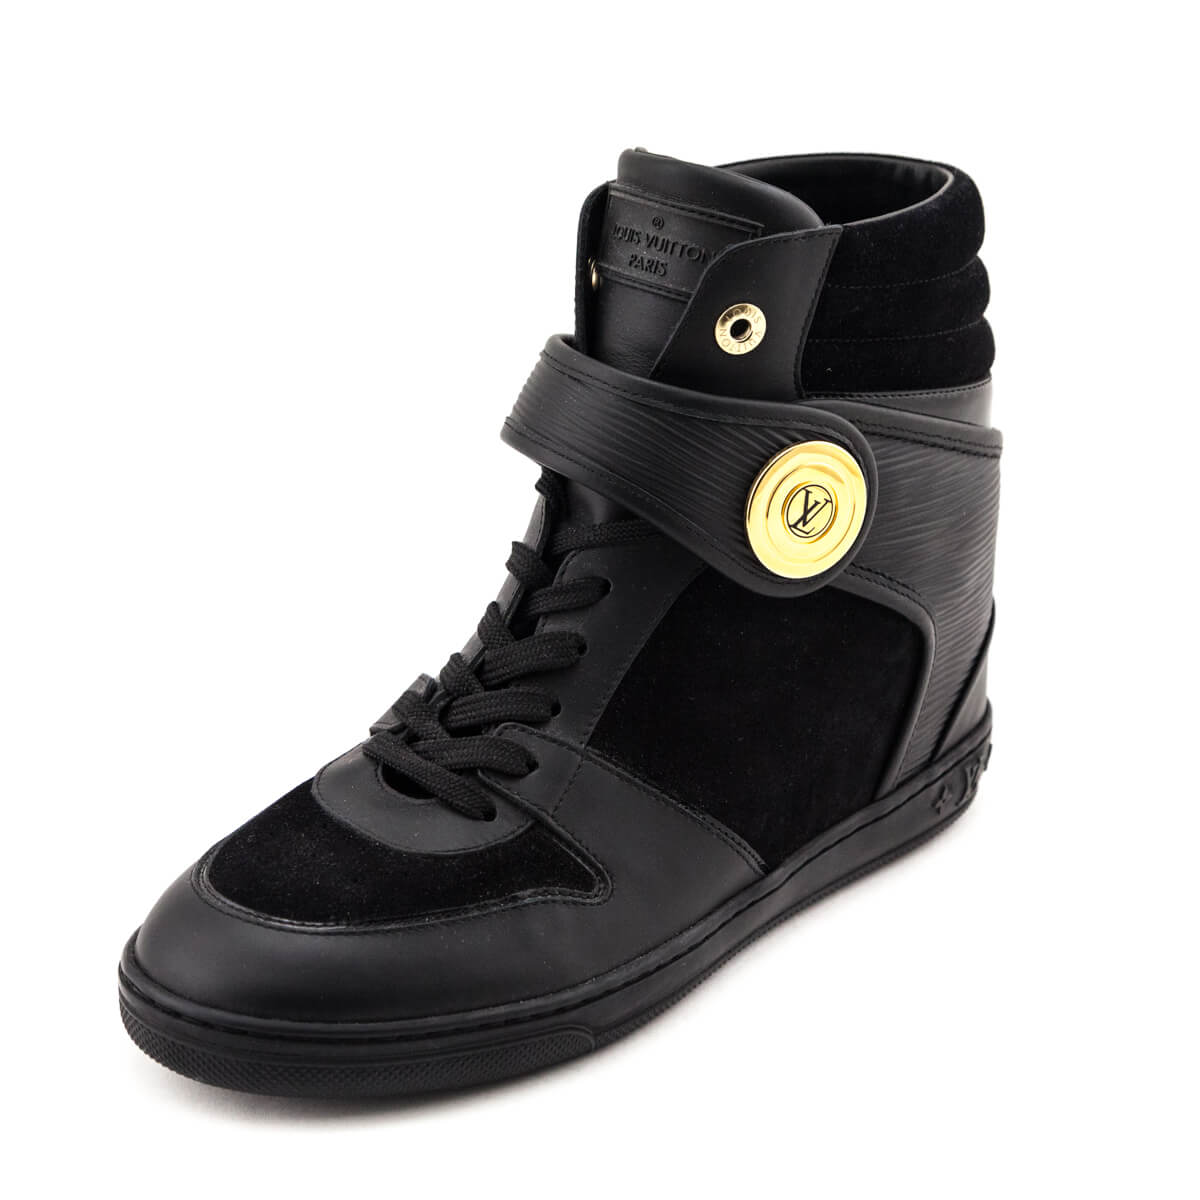 Louis Vuitton Black Suede High Top Wedge Sneakers Size US 11 | EU 41 - Love that Bag etc - Preowned Authentic Designer Handbags & Preloved Fashions